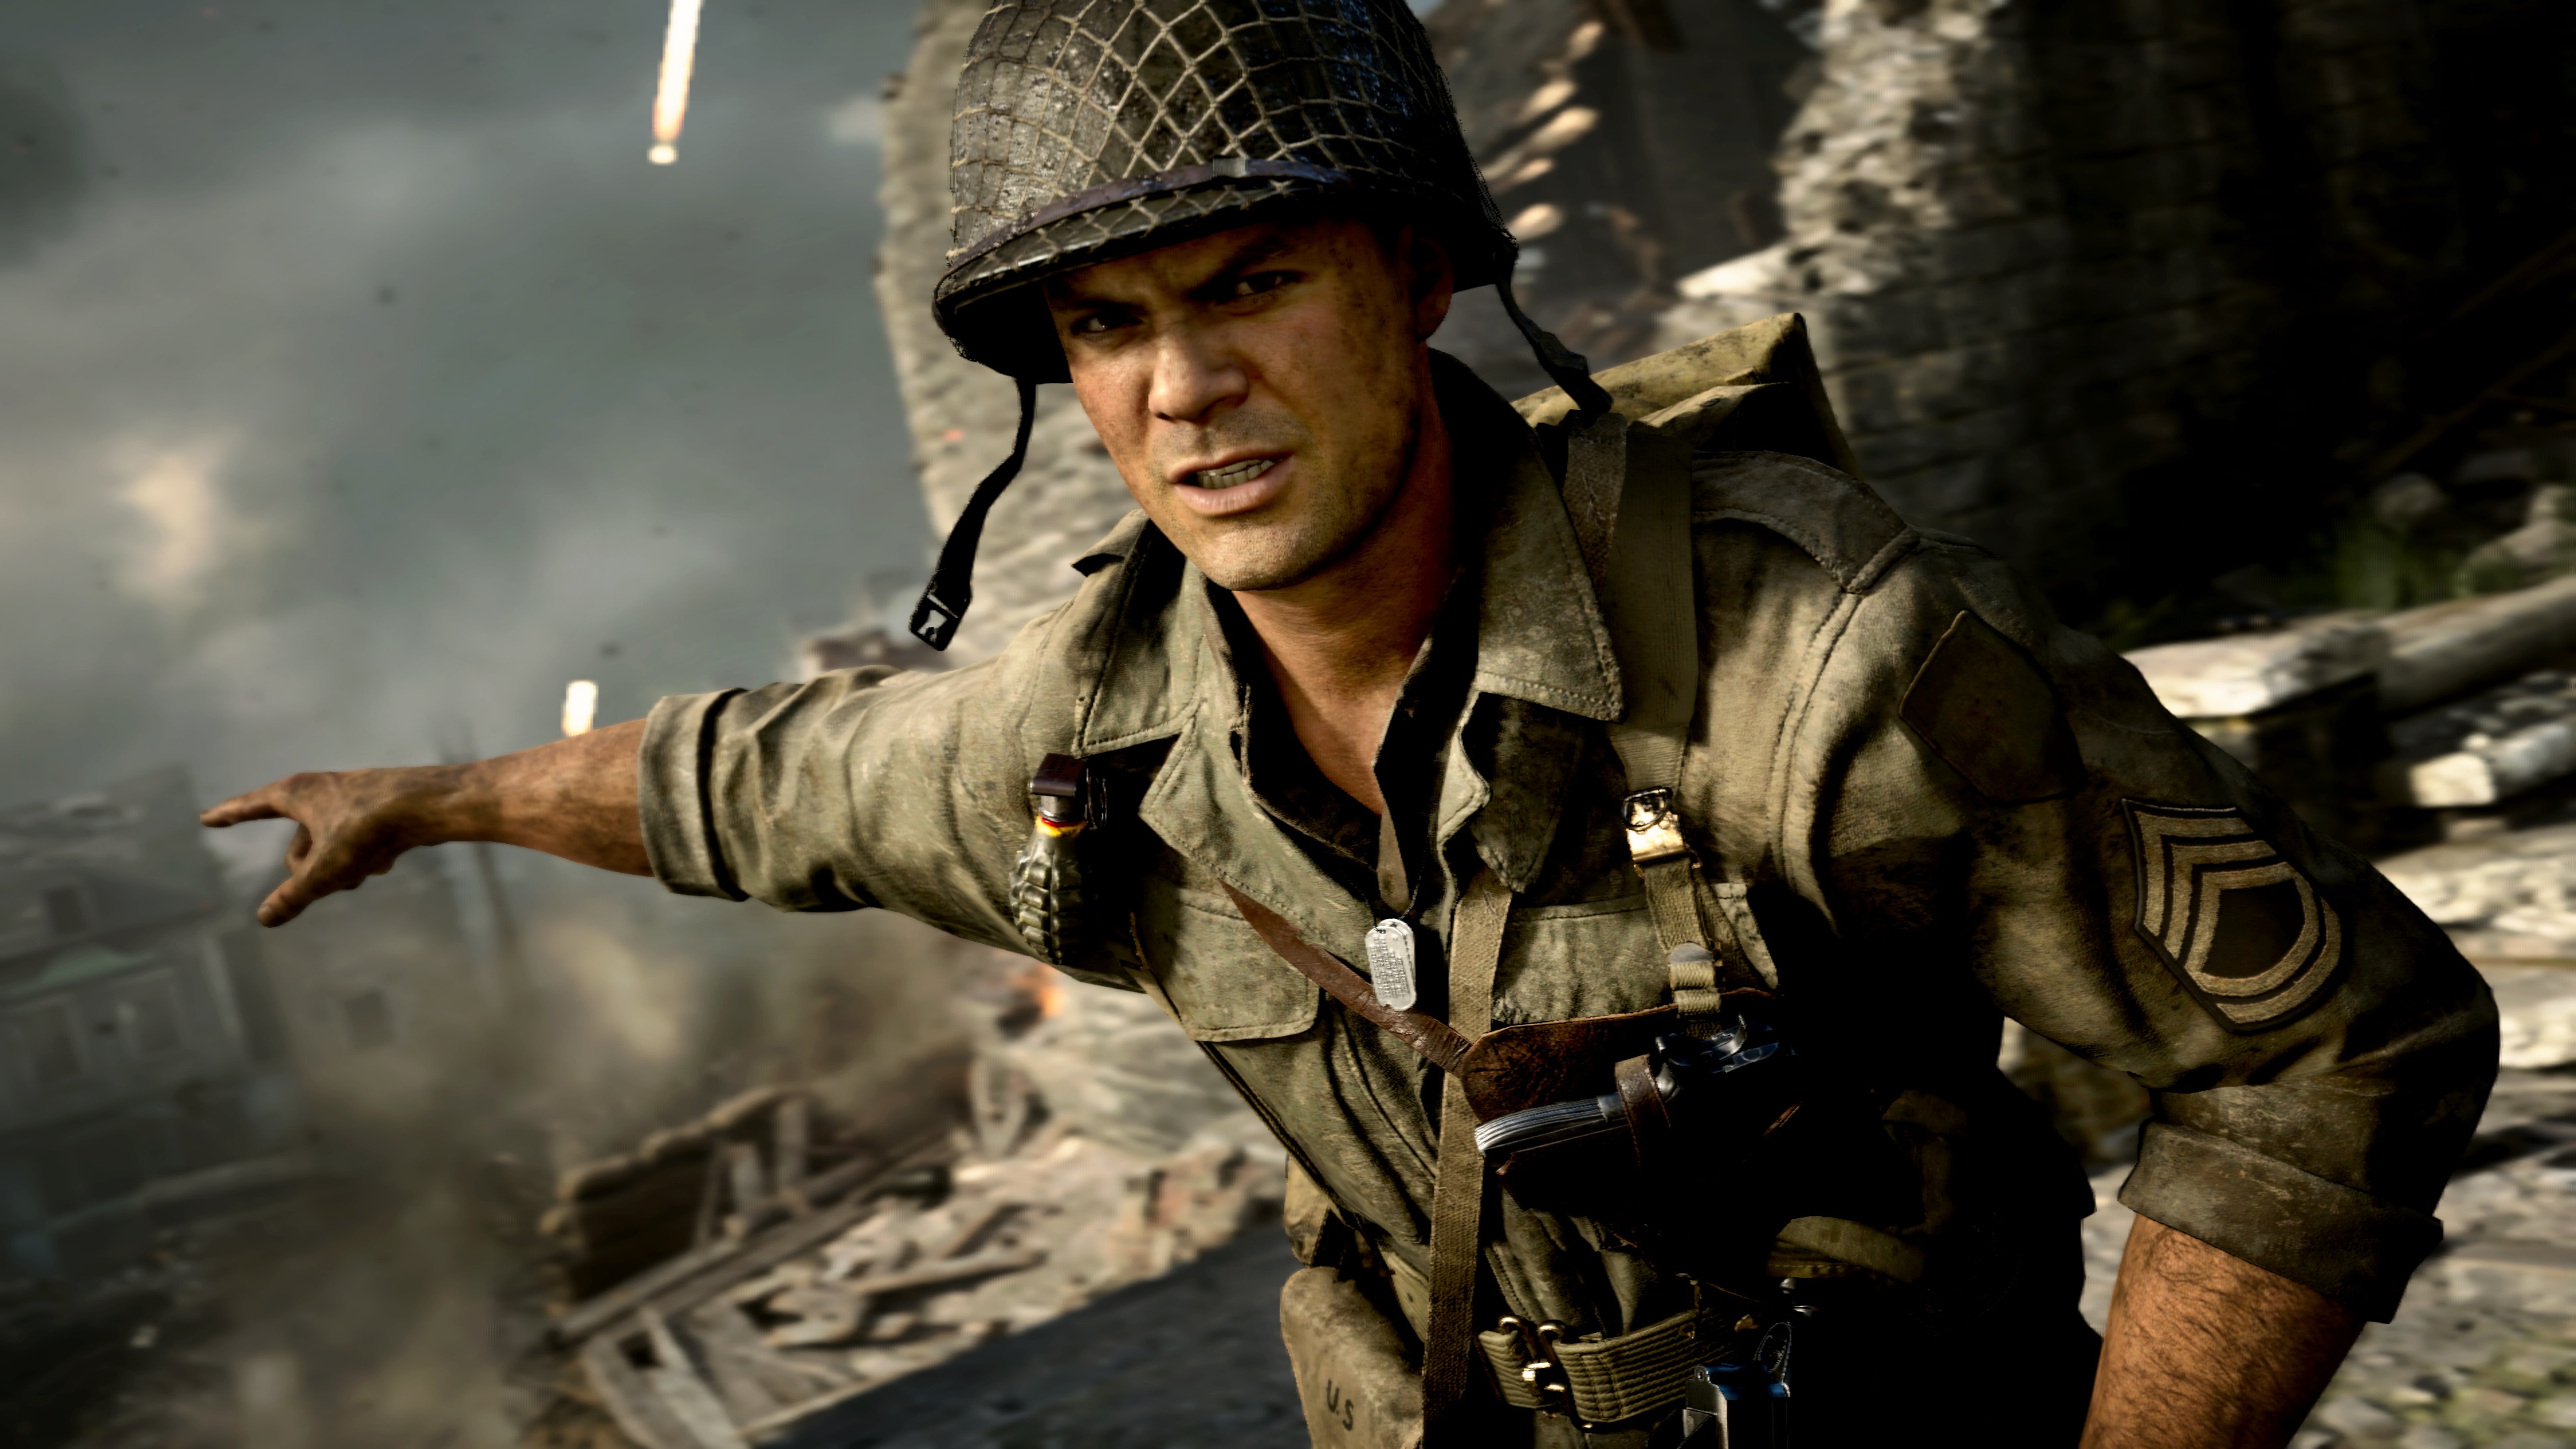  Call Of Duty will reportedly return to World War 2 this year 